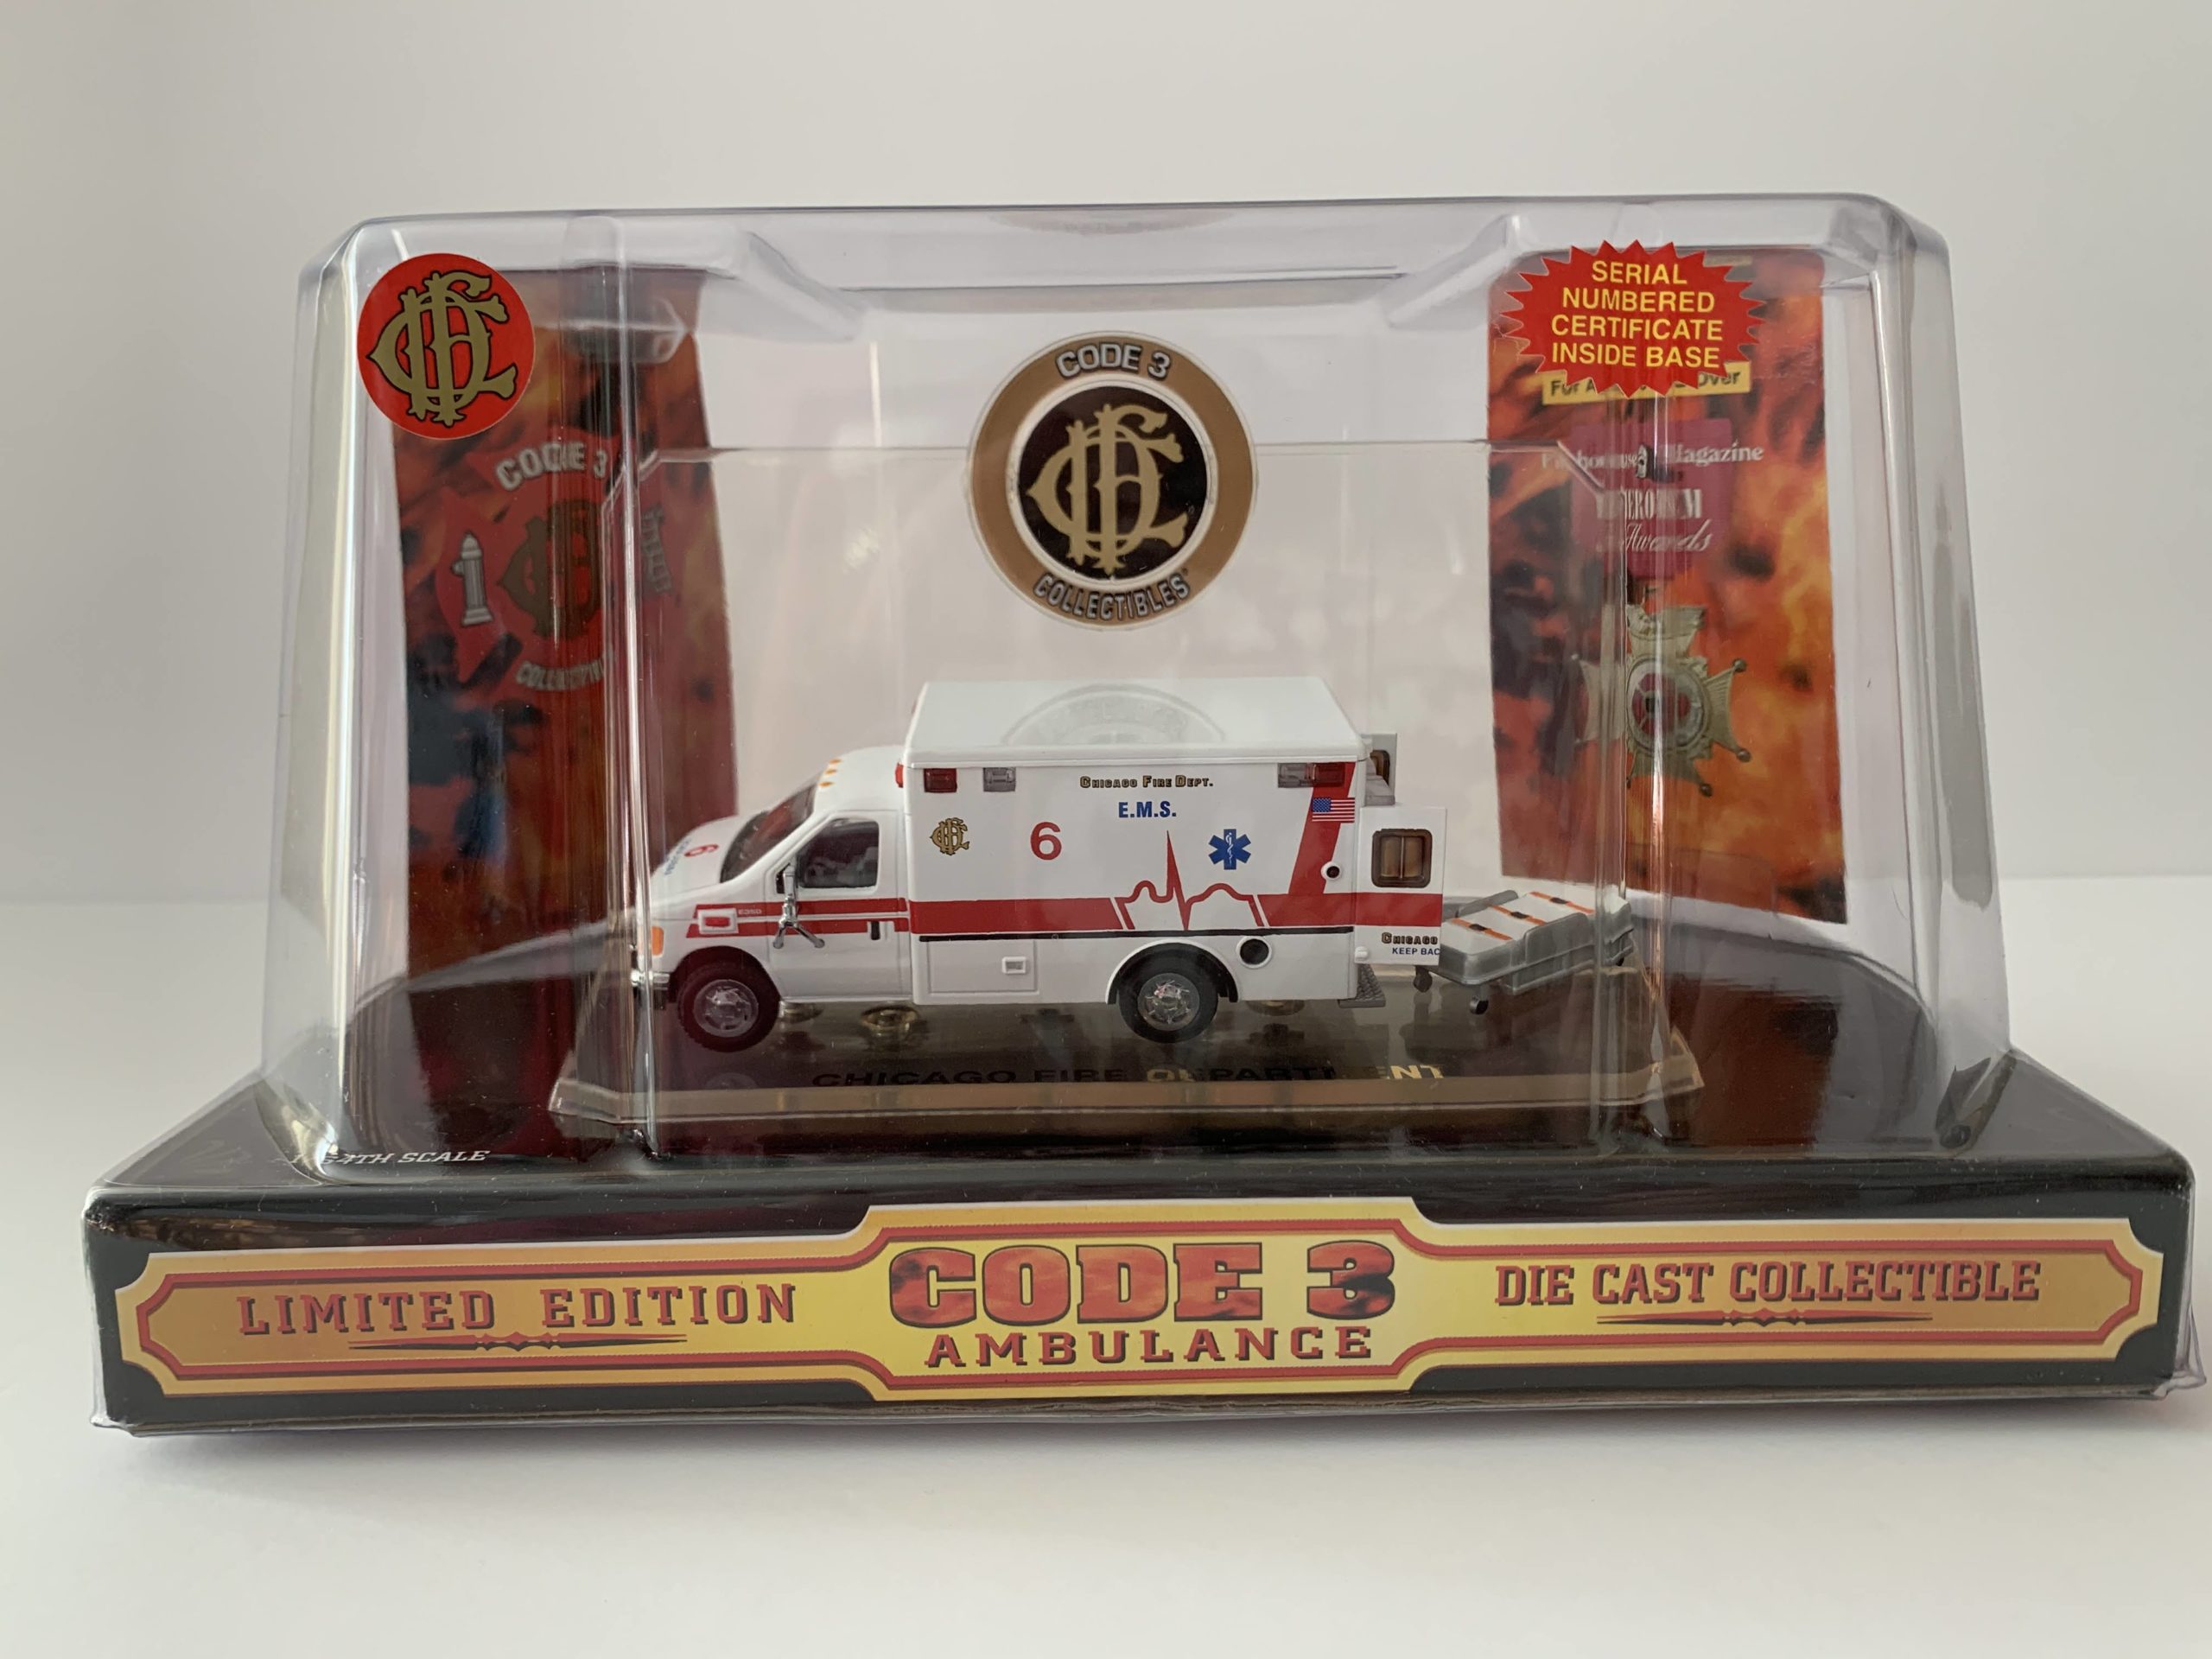 Chicago Illinois  Fire Department  Old School Ambulance Decals  1:64 